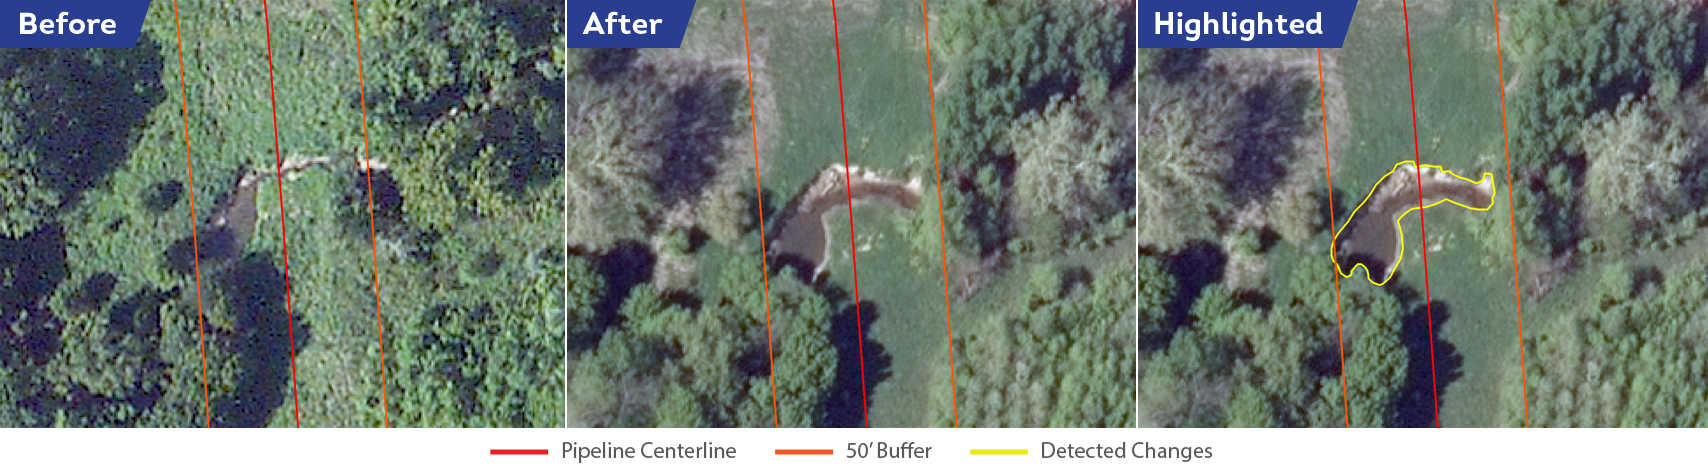 Another water crossing where the bank has eroded significantly. Whereas current surveying methods rely on aircraft pilot or field crew judgments, Satelytics allows for a clear side-by-side comparison of the dates.